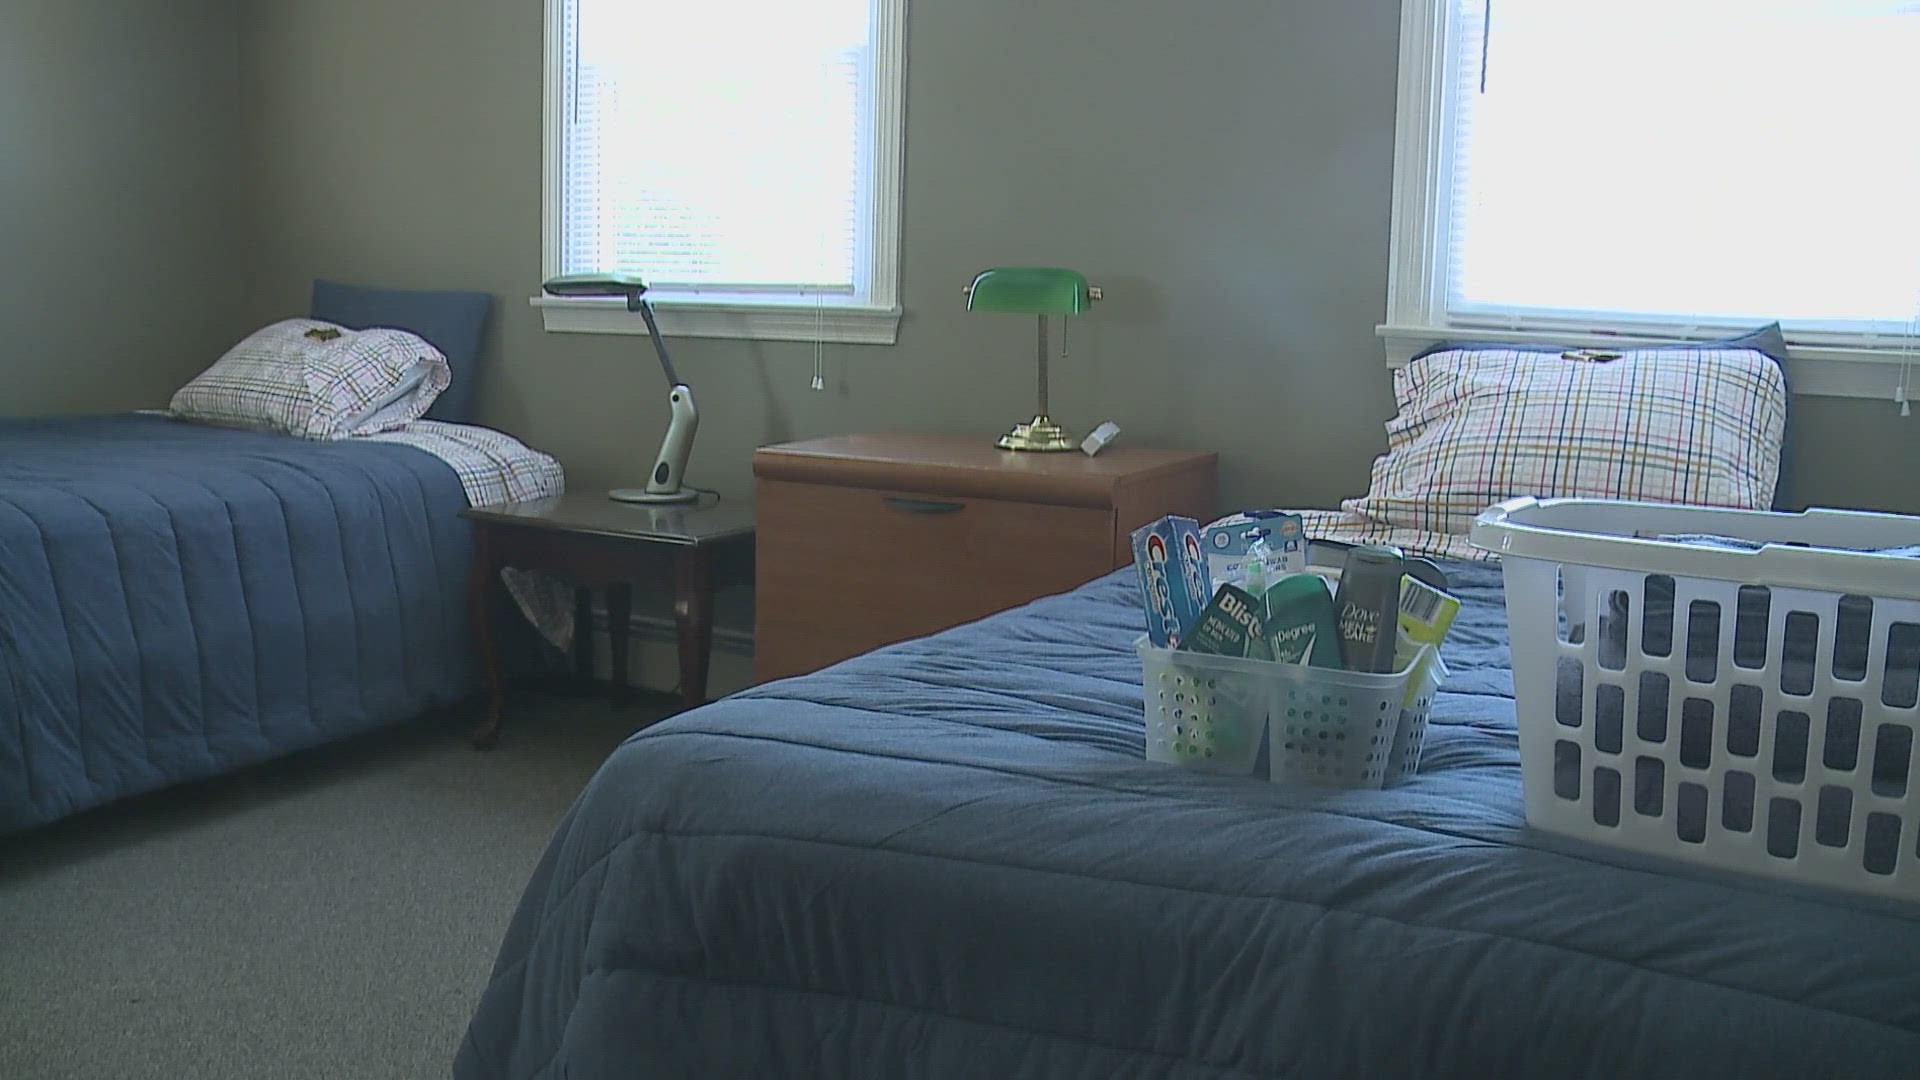 The Midcoast Youth Center recently opened its doors to more than a half-dozen 18 to 24-year-olds with the goal of bringing them out of homelessness.